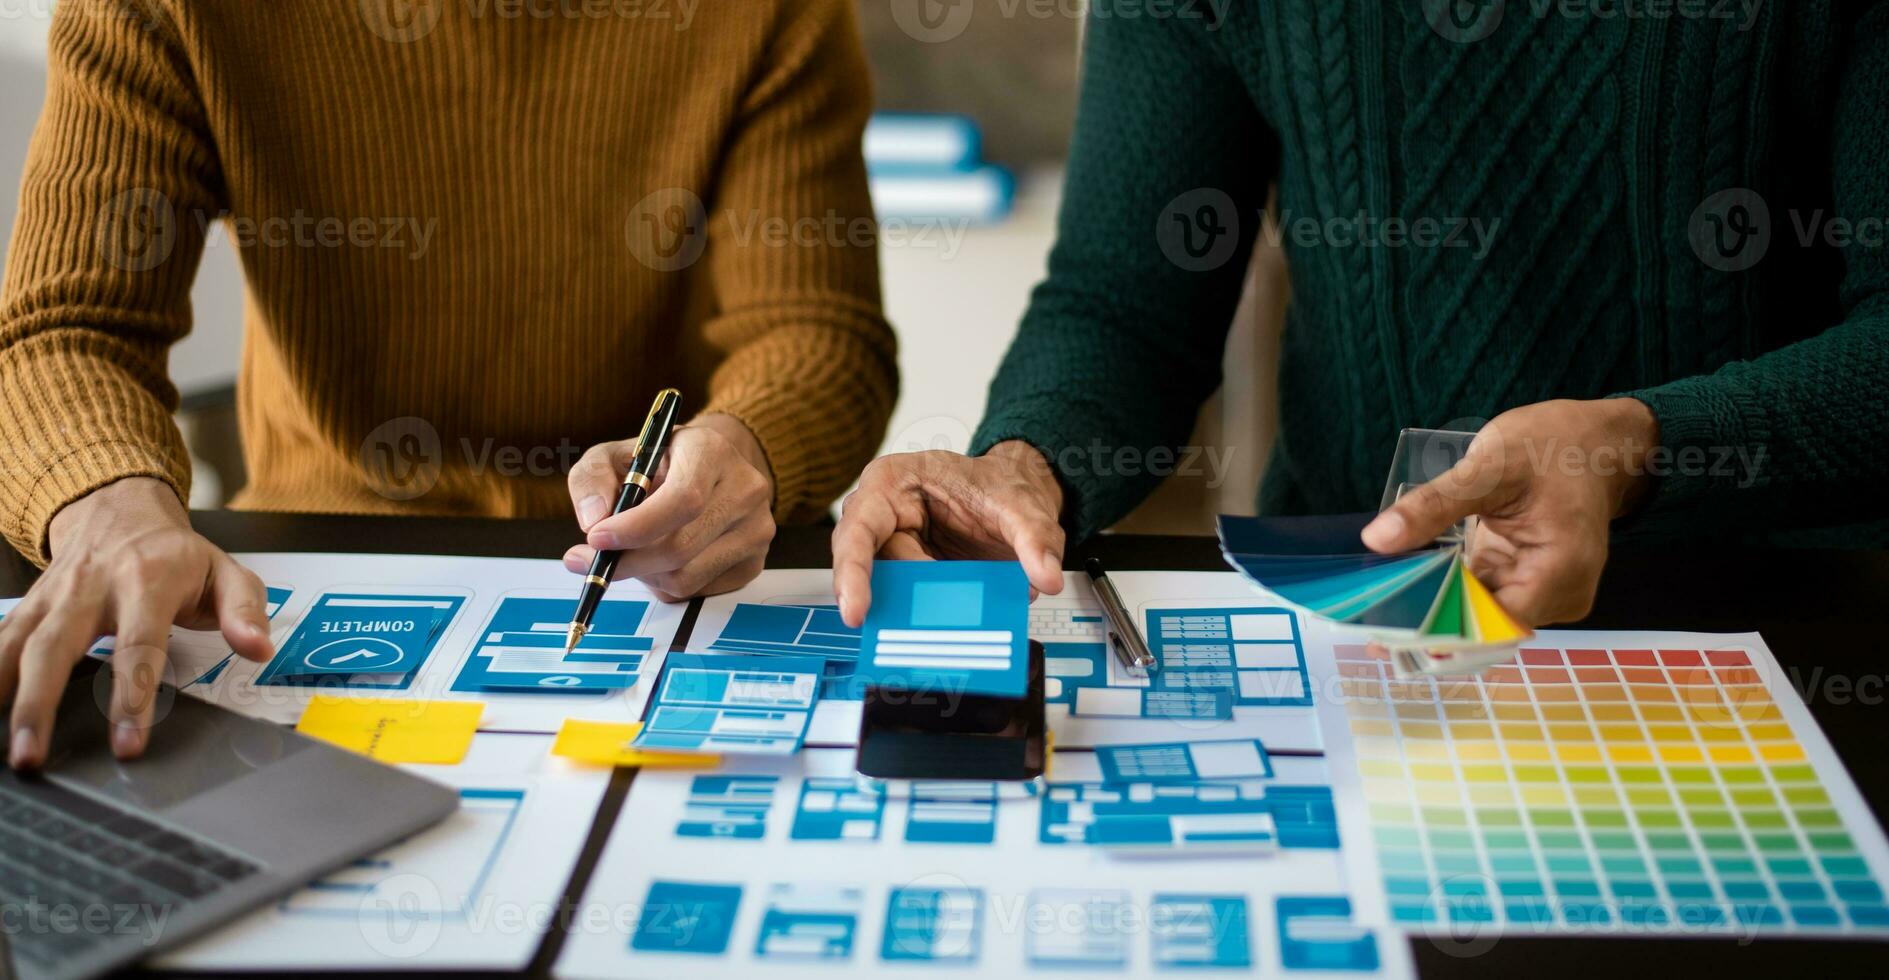 UI designer UX developer andbrainstorming about mobile app interface wireframe design with customer breif and color code. photo